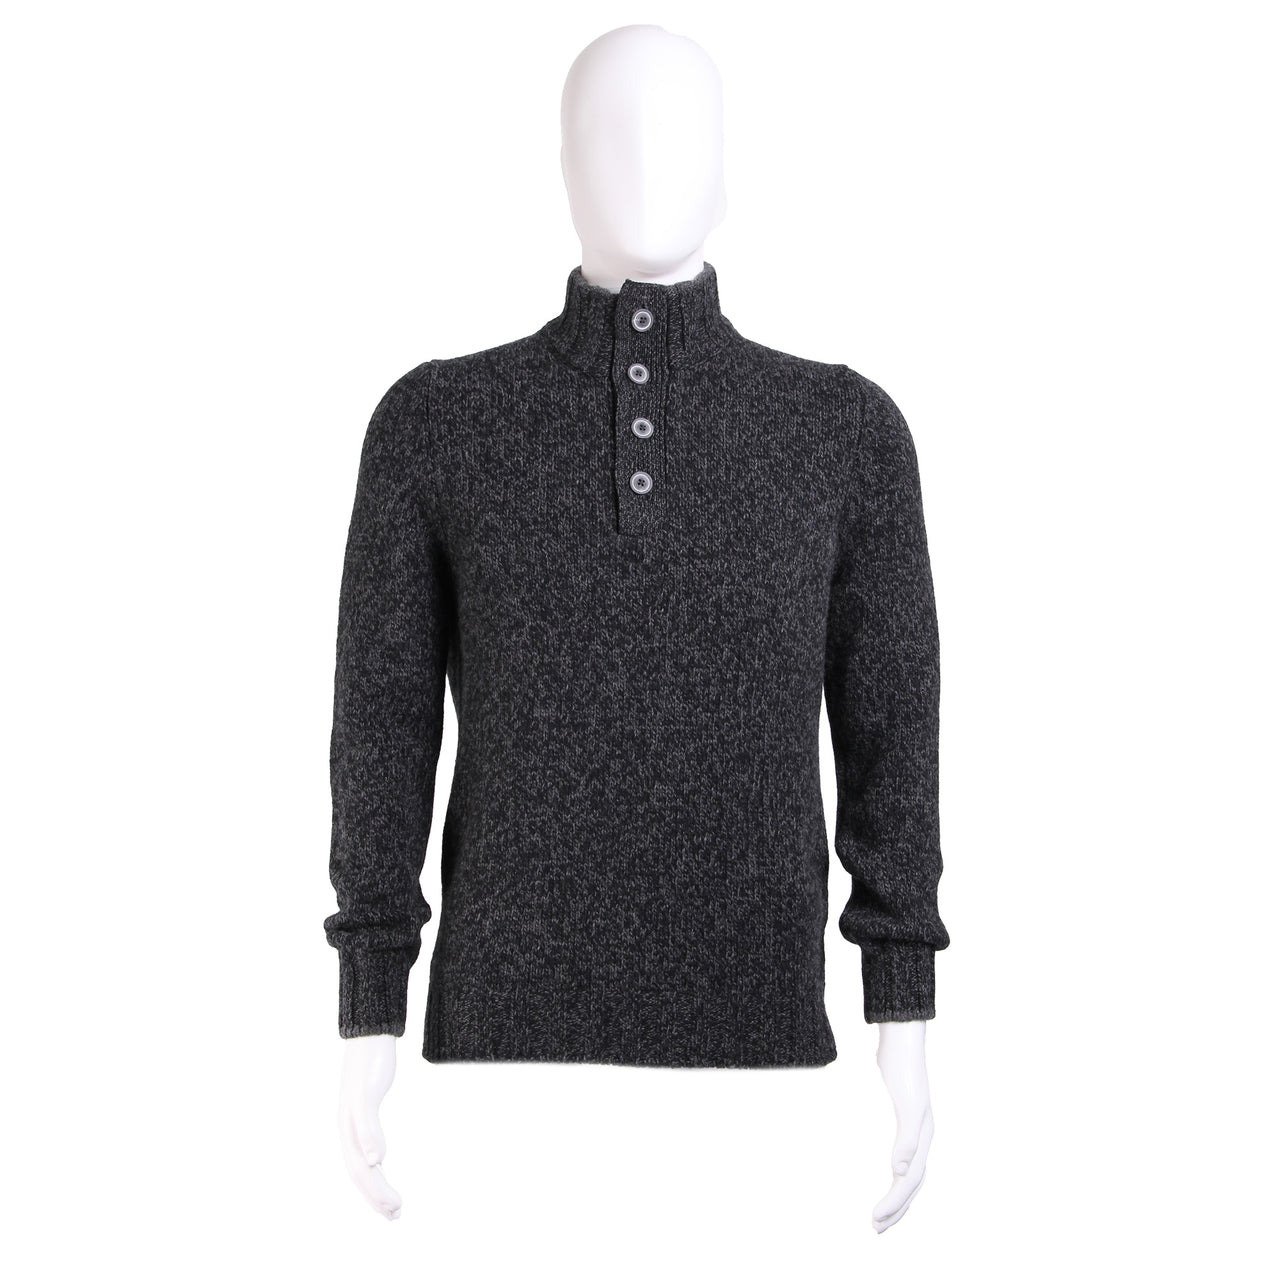 GRAN SASSO Super Geelong Lambswool 1/4 Button Knit CHARCOAL